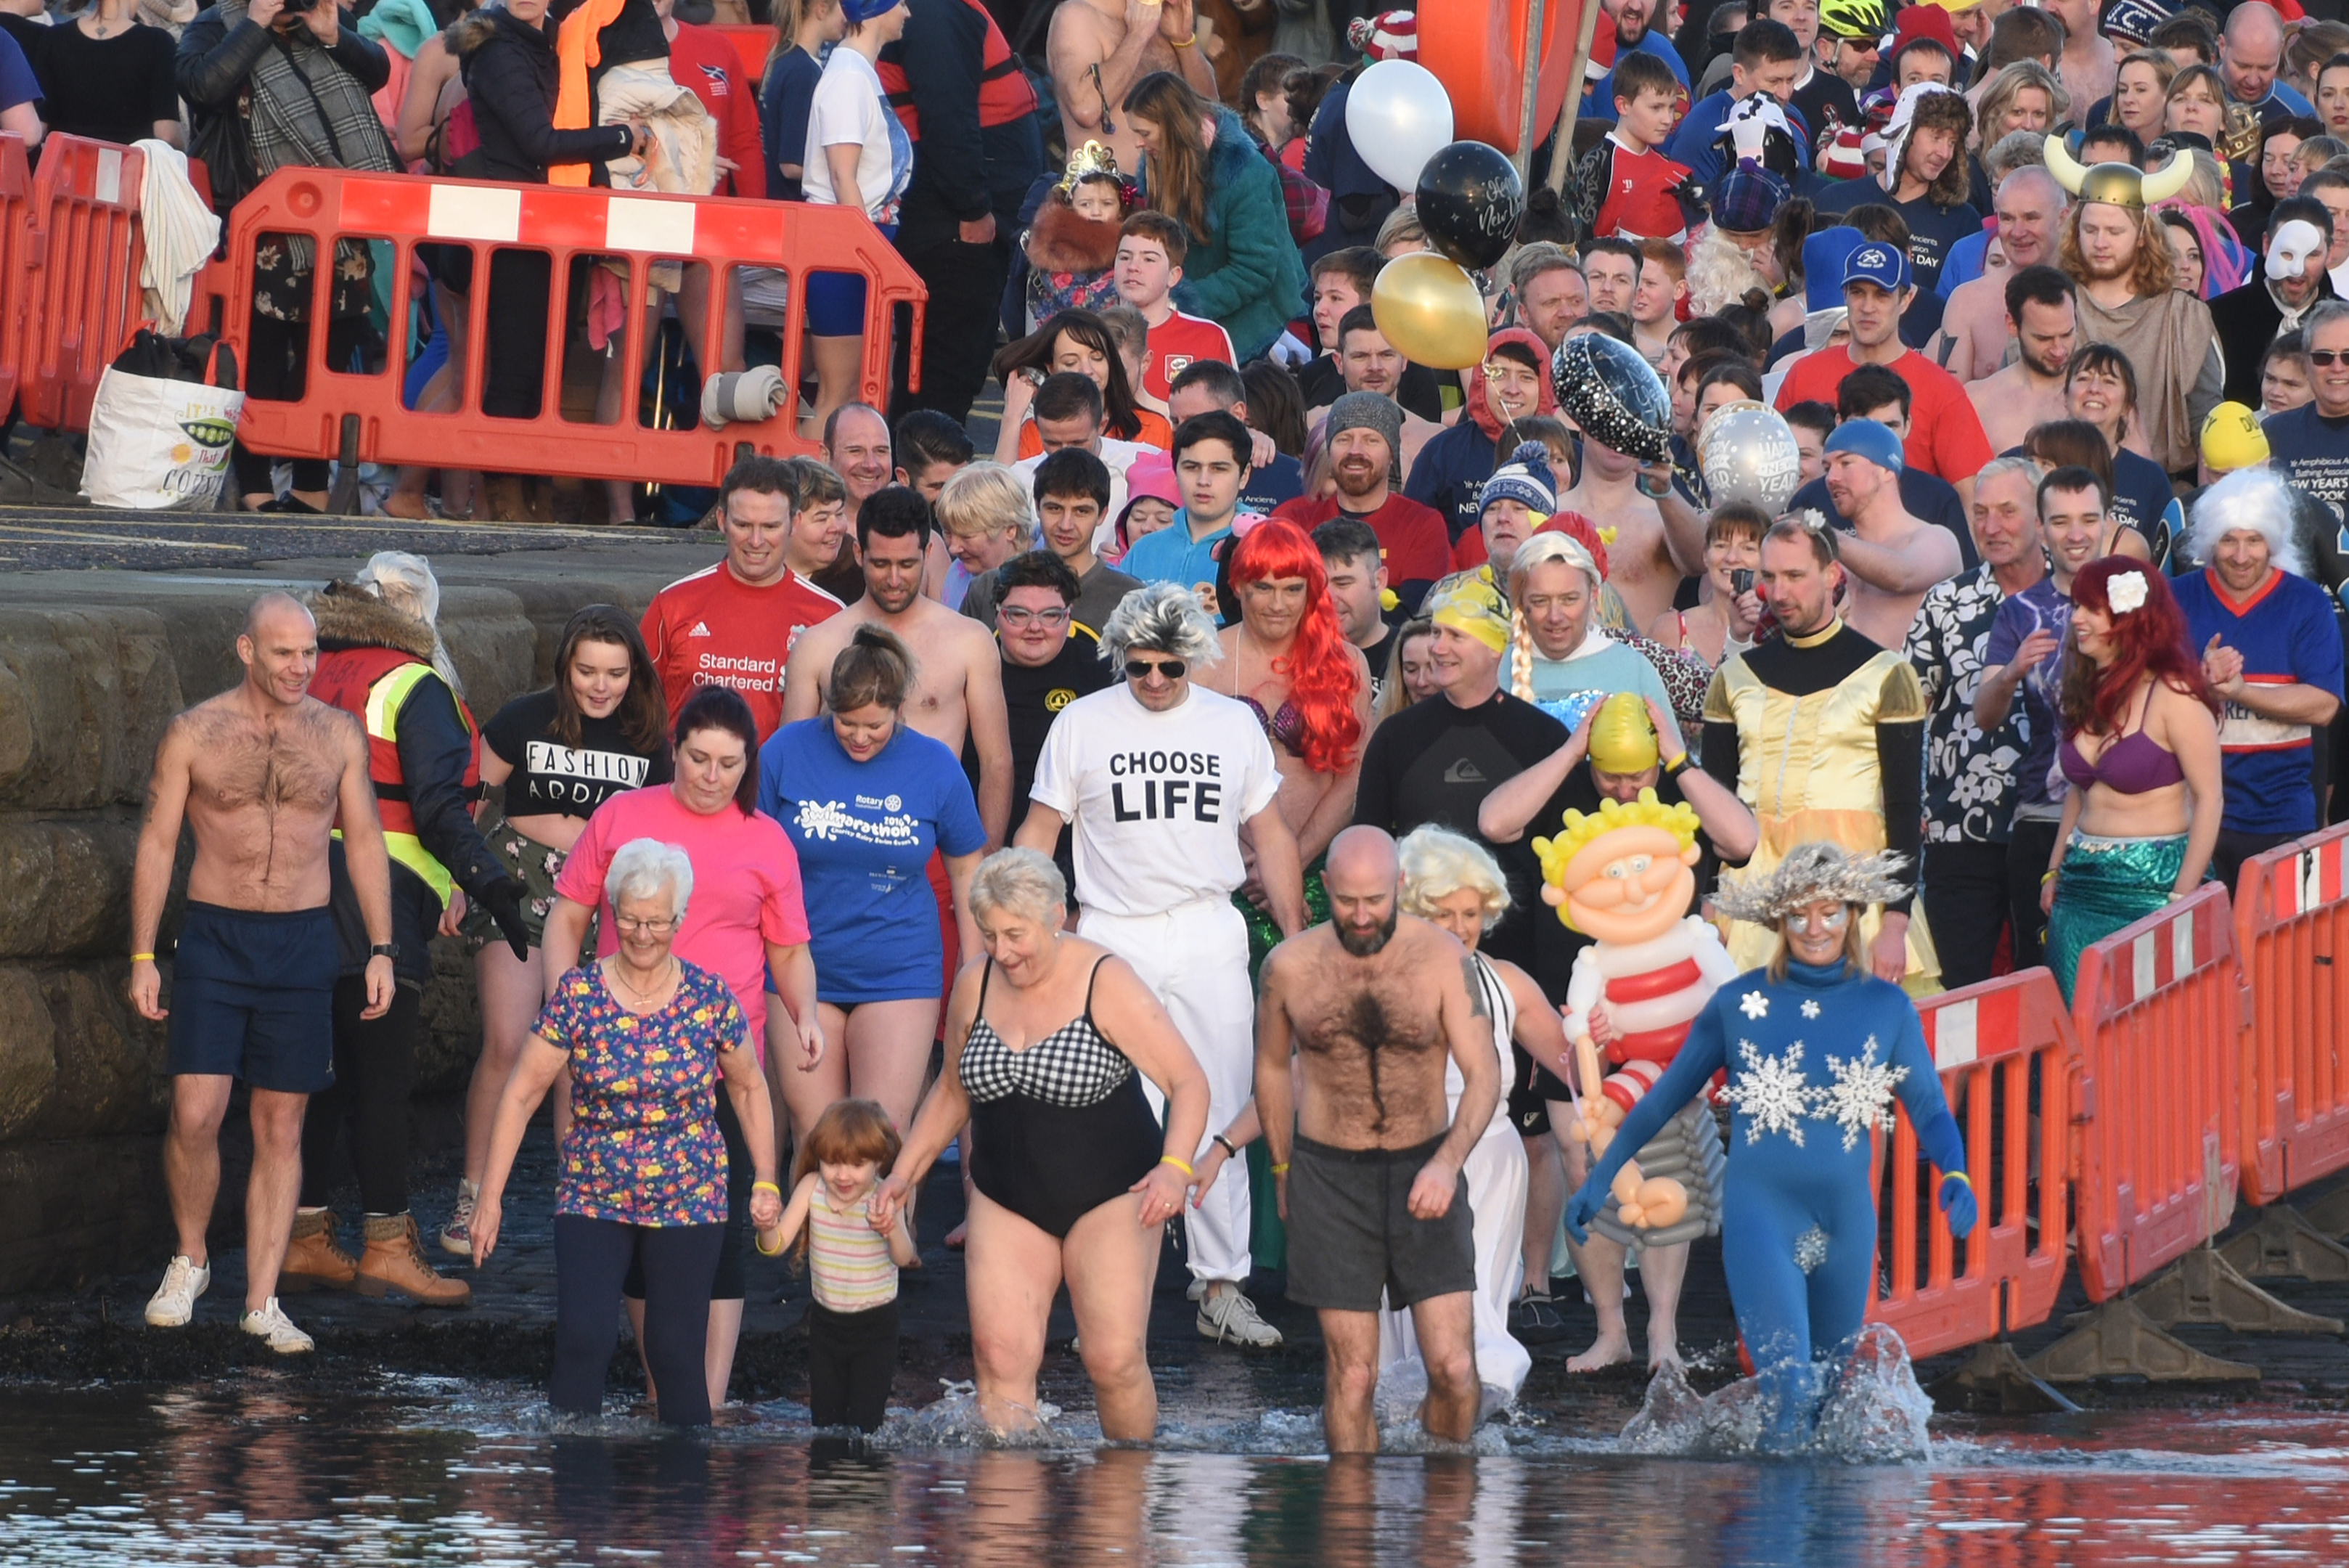 Brave souls entering the water on January 1 this year.